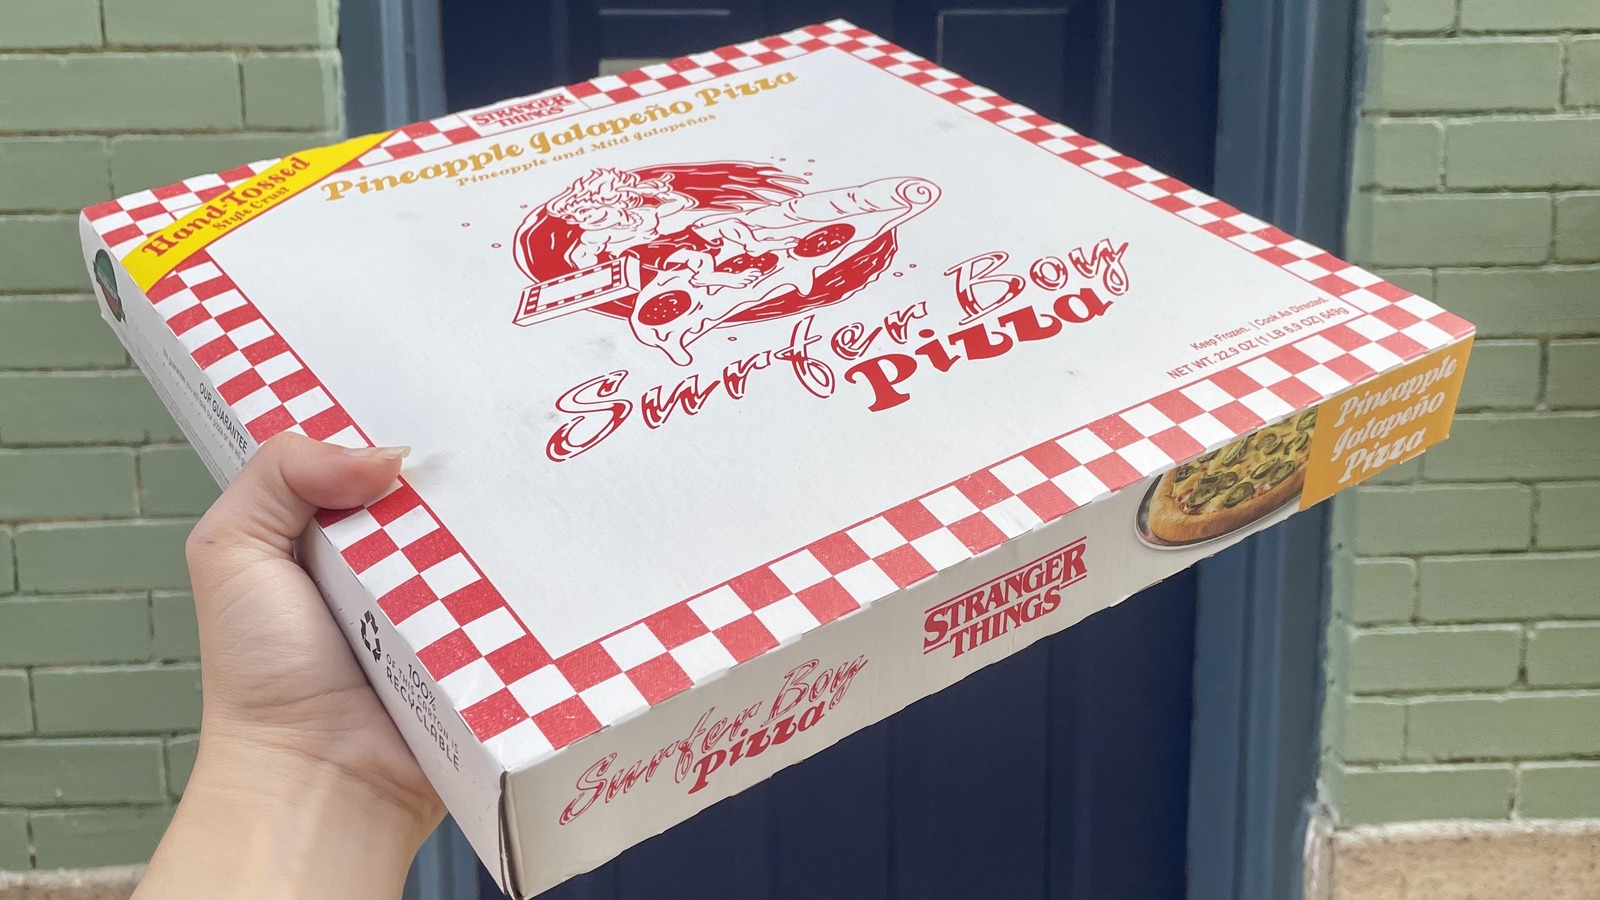 We Tried The Stranger Things Surfer Boy Pizza. Here's How It Went